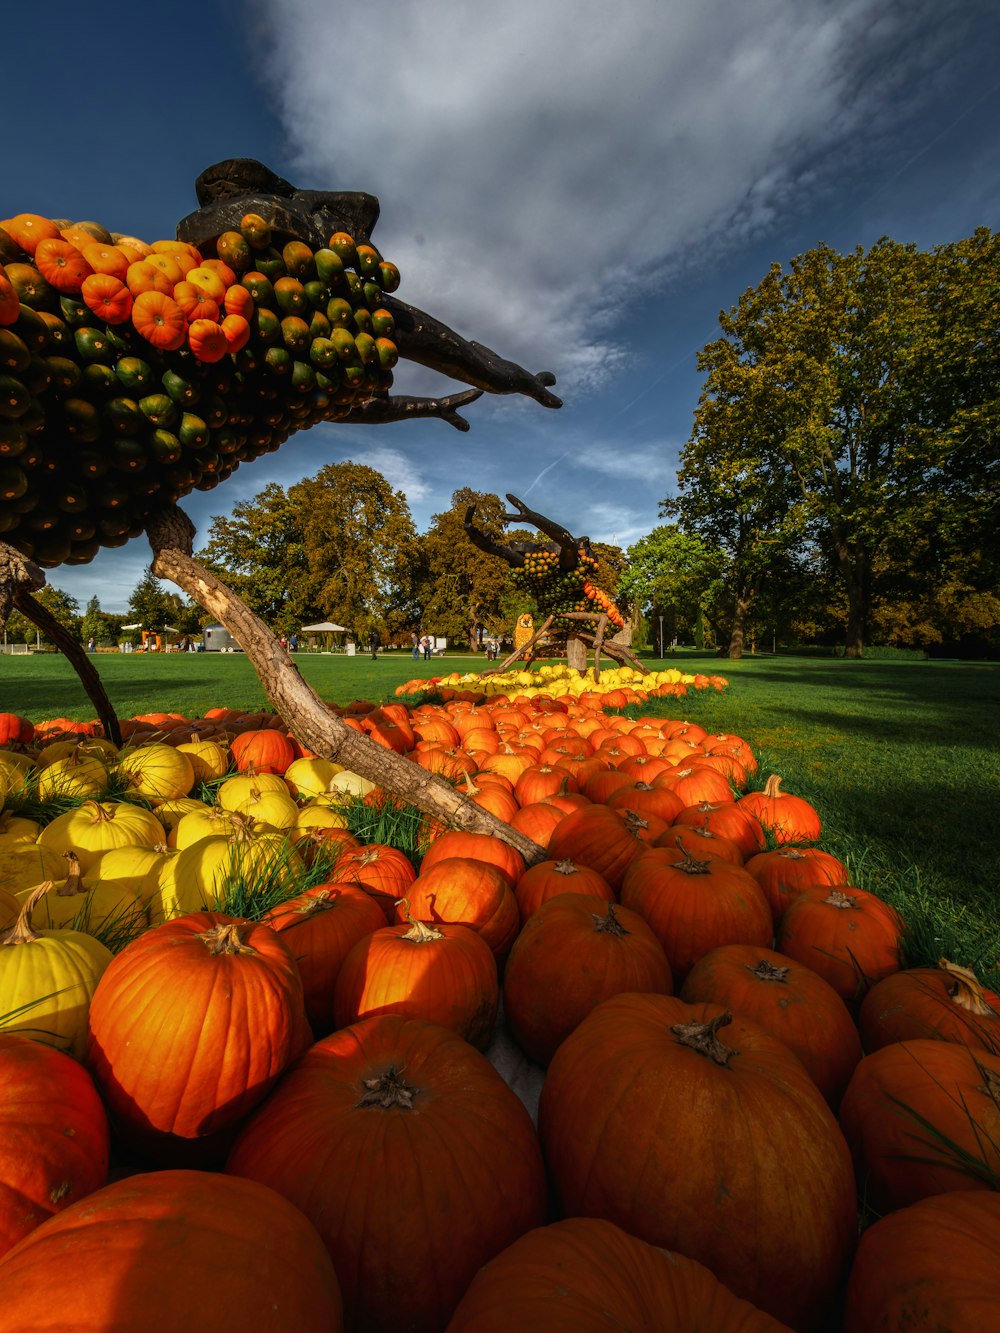 a display of pumpkins and gourds in a field